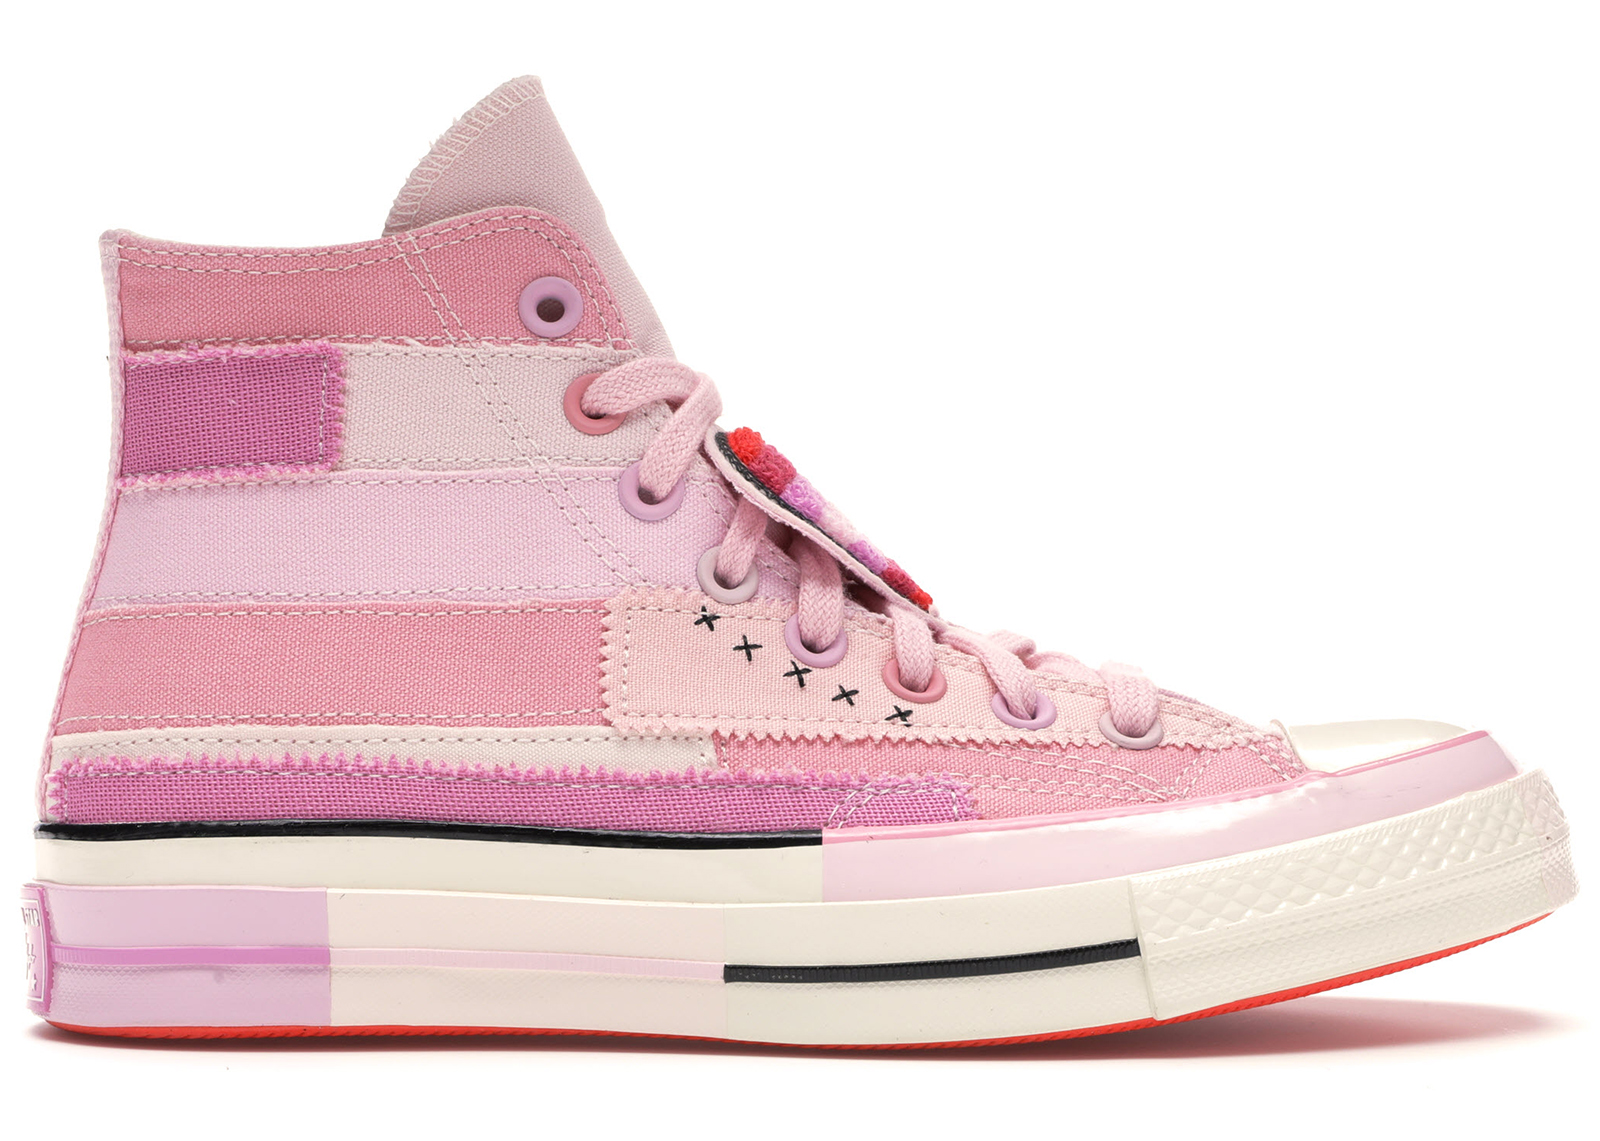 converse millie bobby brown